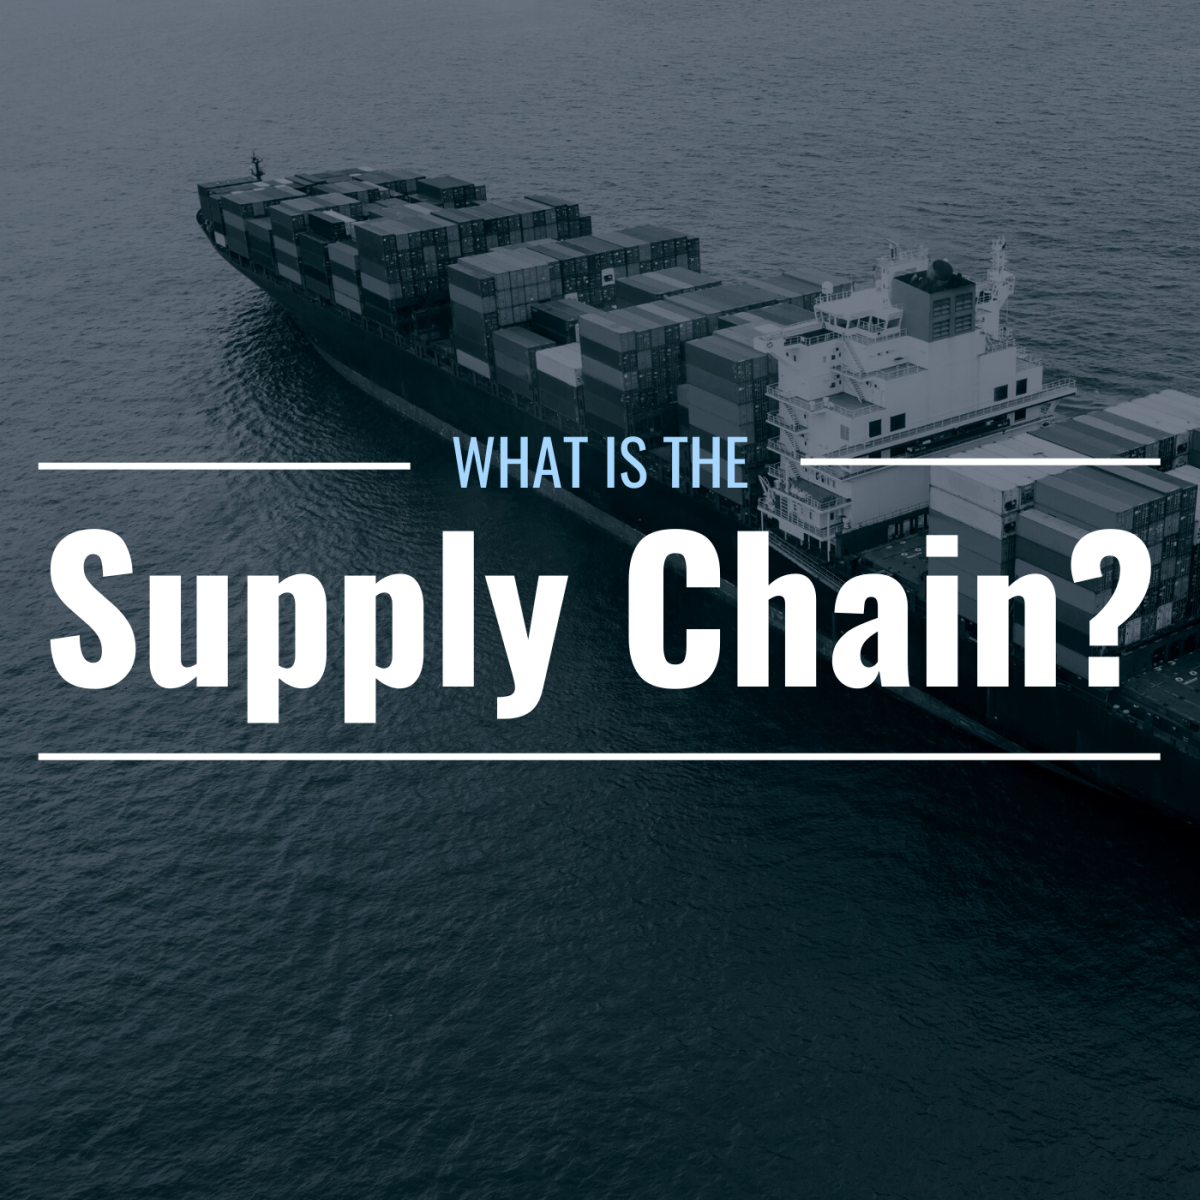 Image of a cargo ship with text overlay "What Is the Supply Chain?"